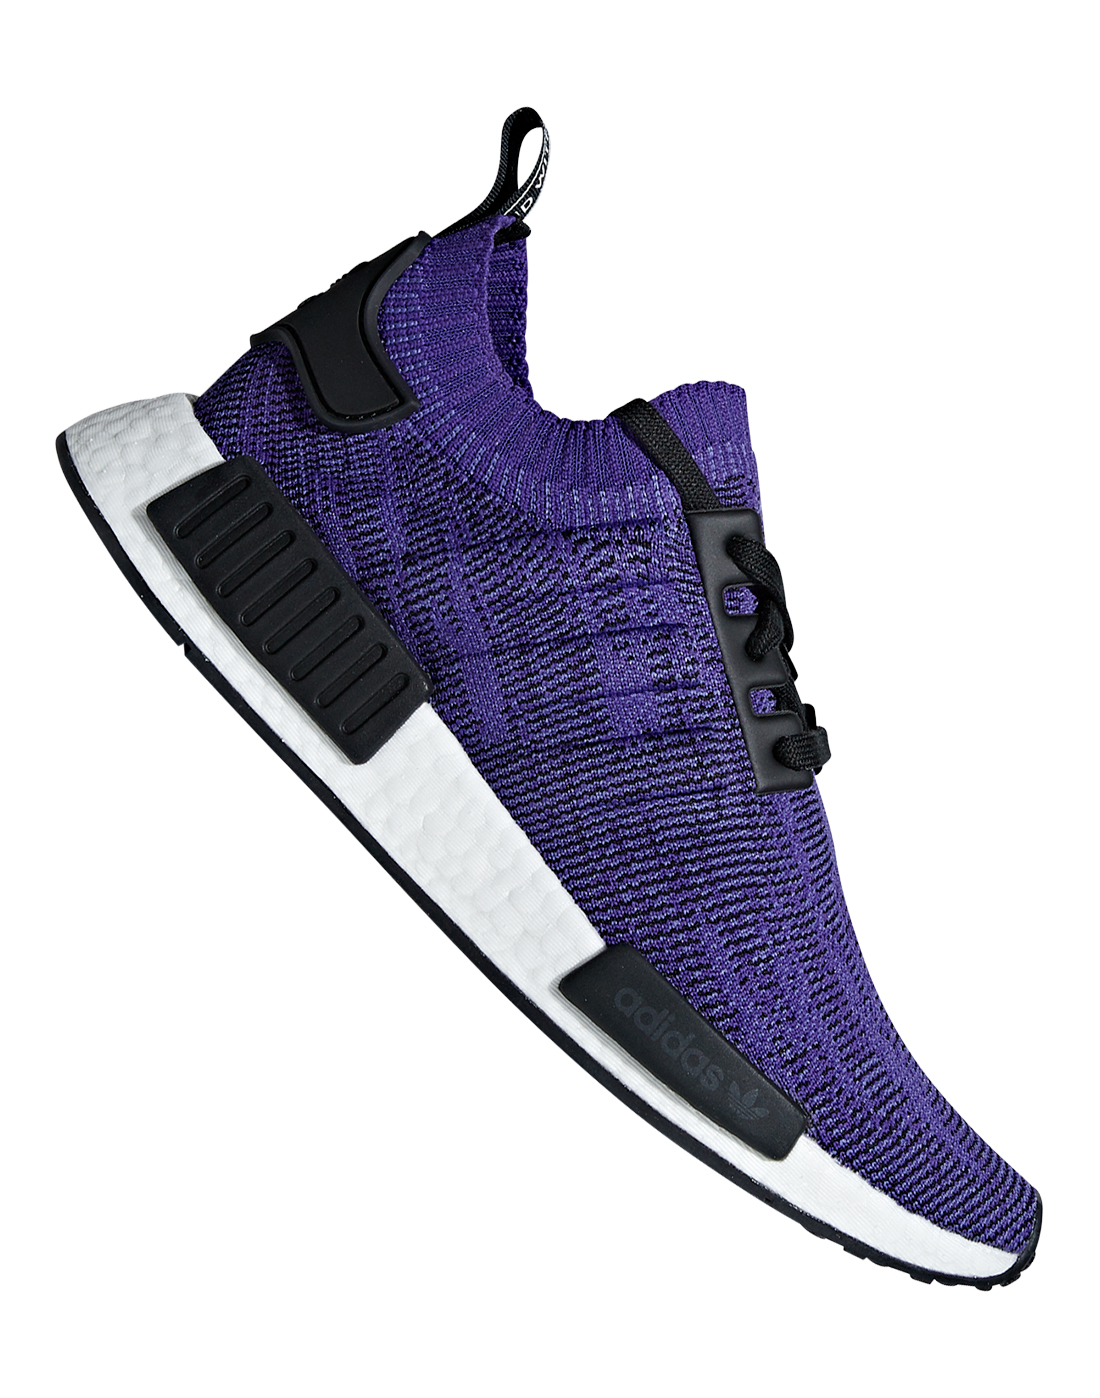 nmd_r1 primeknit shoes energy ink